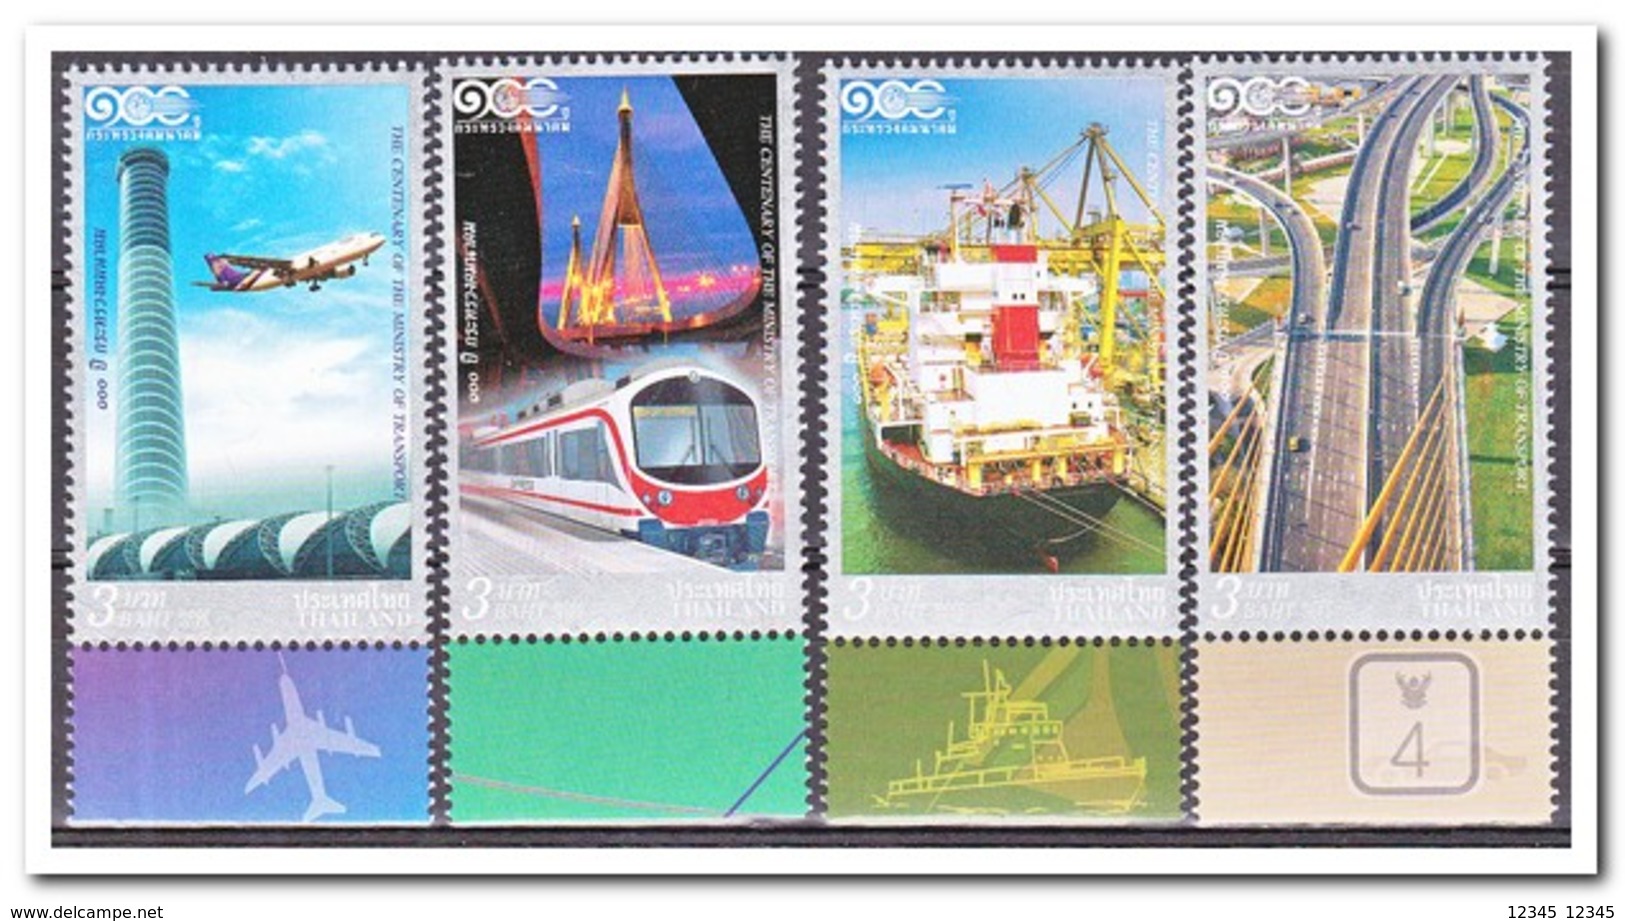 Thailand 2012, Postfris MNH, The Ministry Of Transport - Thailand